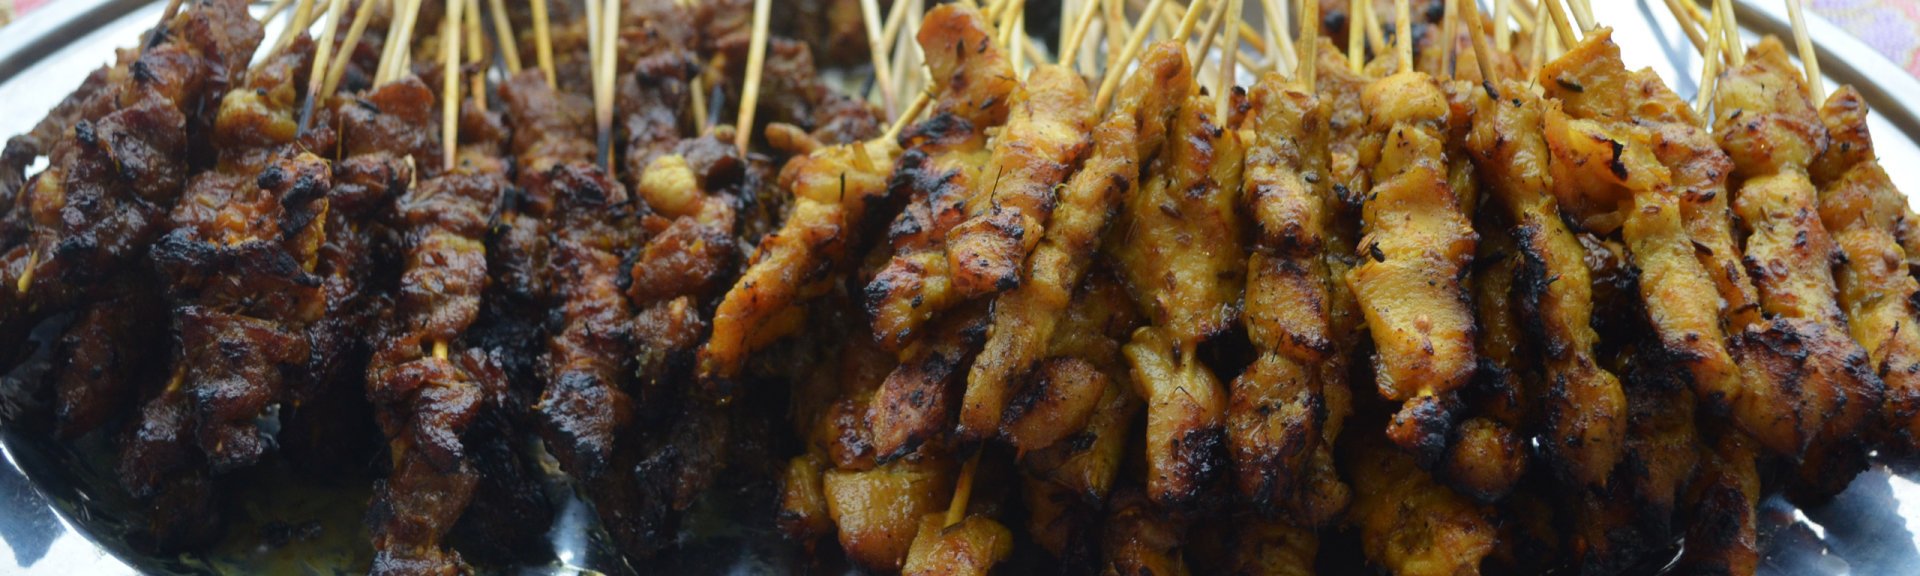 Satay is typical of the island's Malay influence.